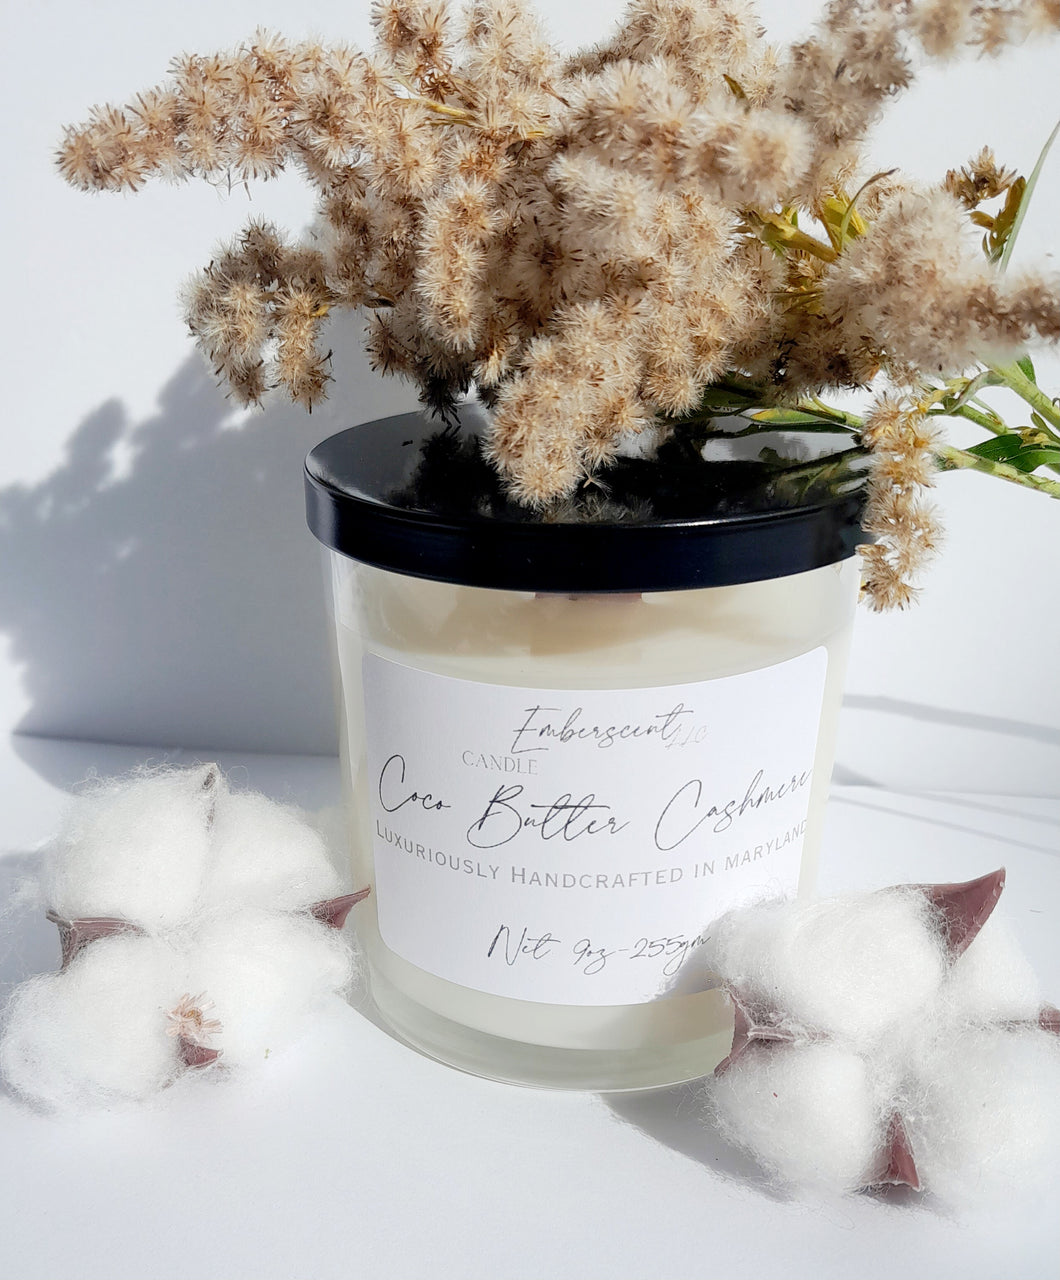 Coco Butter Cashmere 9oz Candle